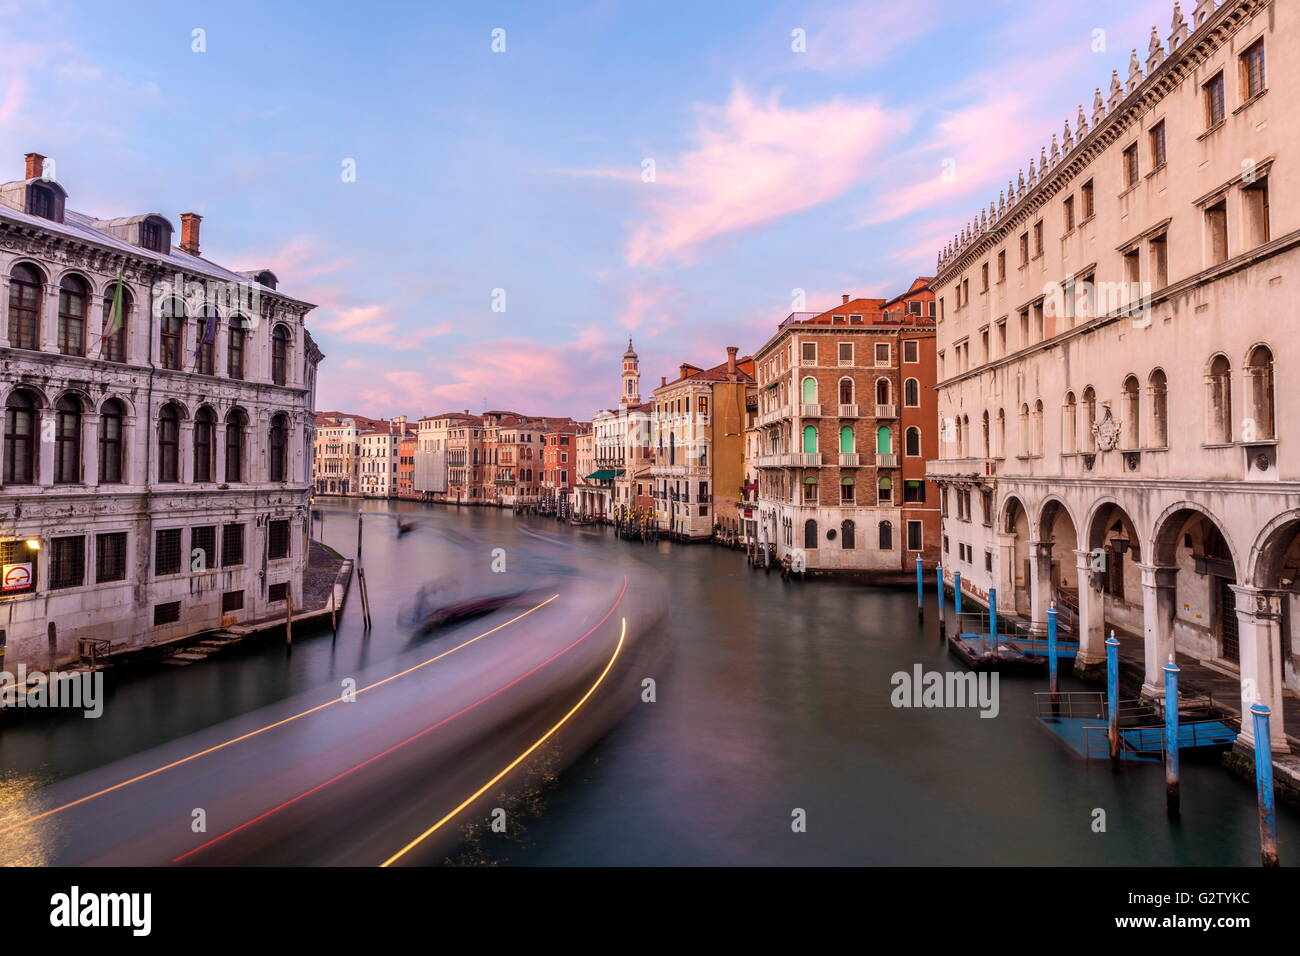 The typical gondolas at sunset in Canal Grande surrounded by the historic buildings and palaces in Venice Veneto Italy Europe Stock Photo